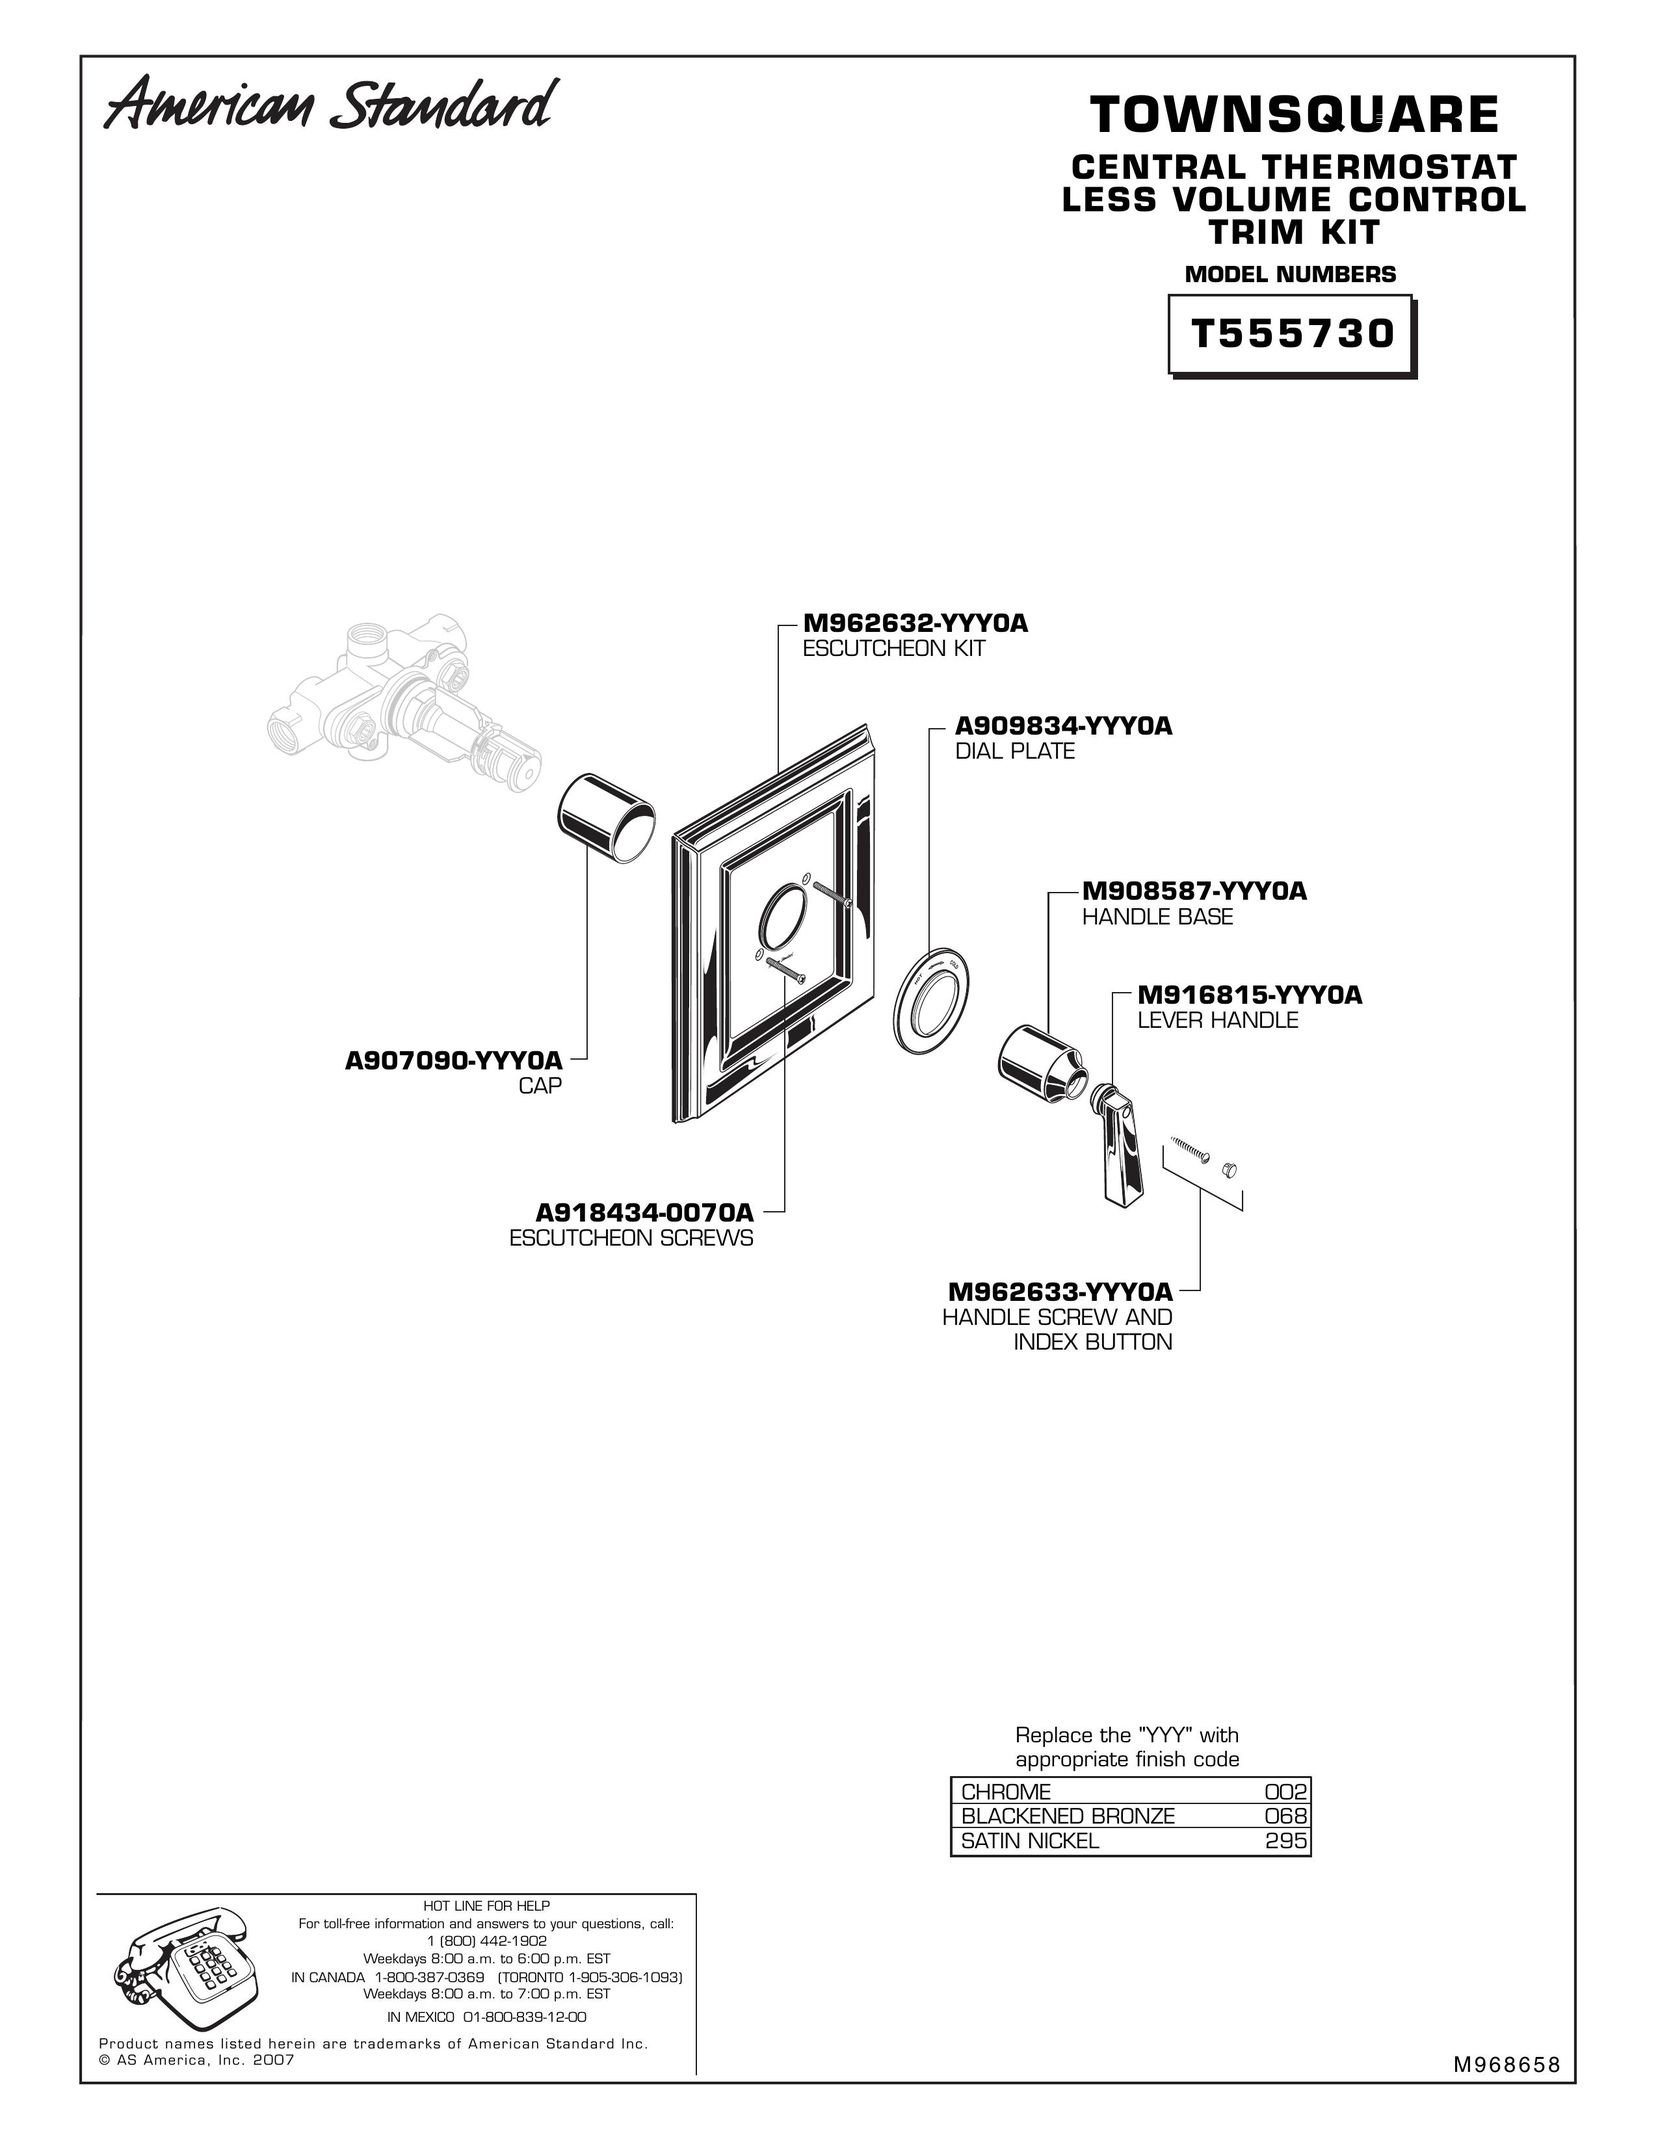 American Standard T555730 Thermostat User Manual